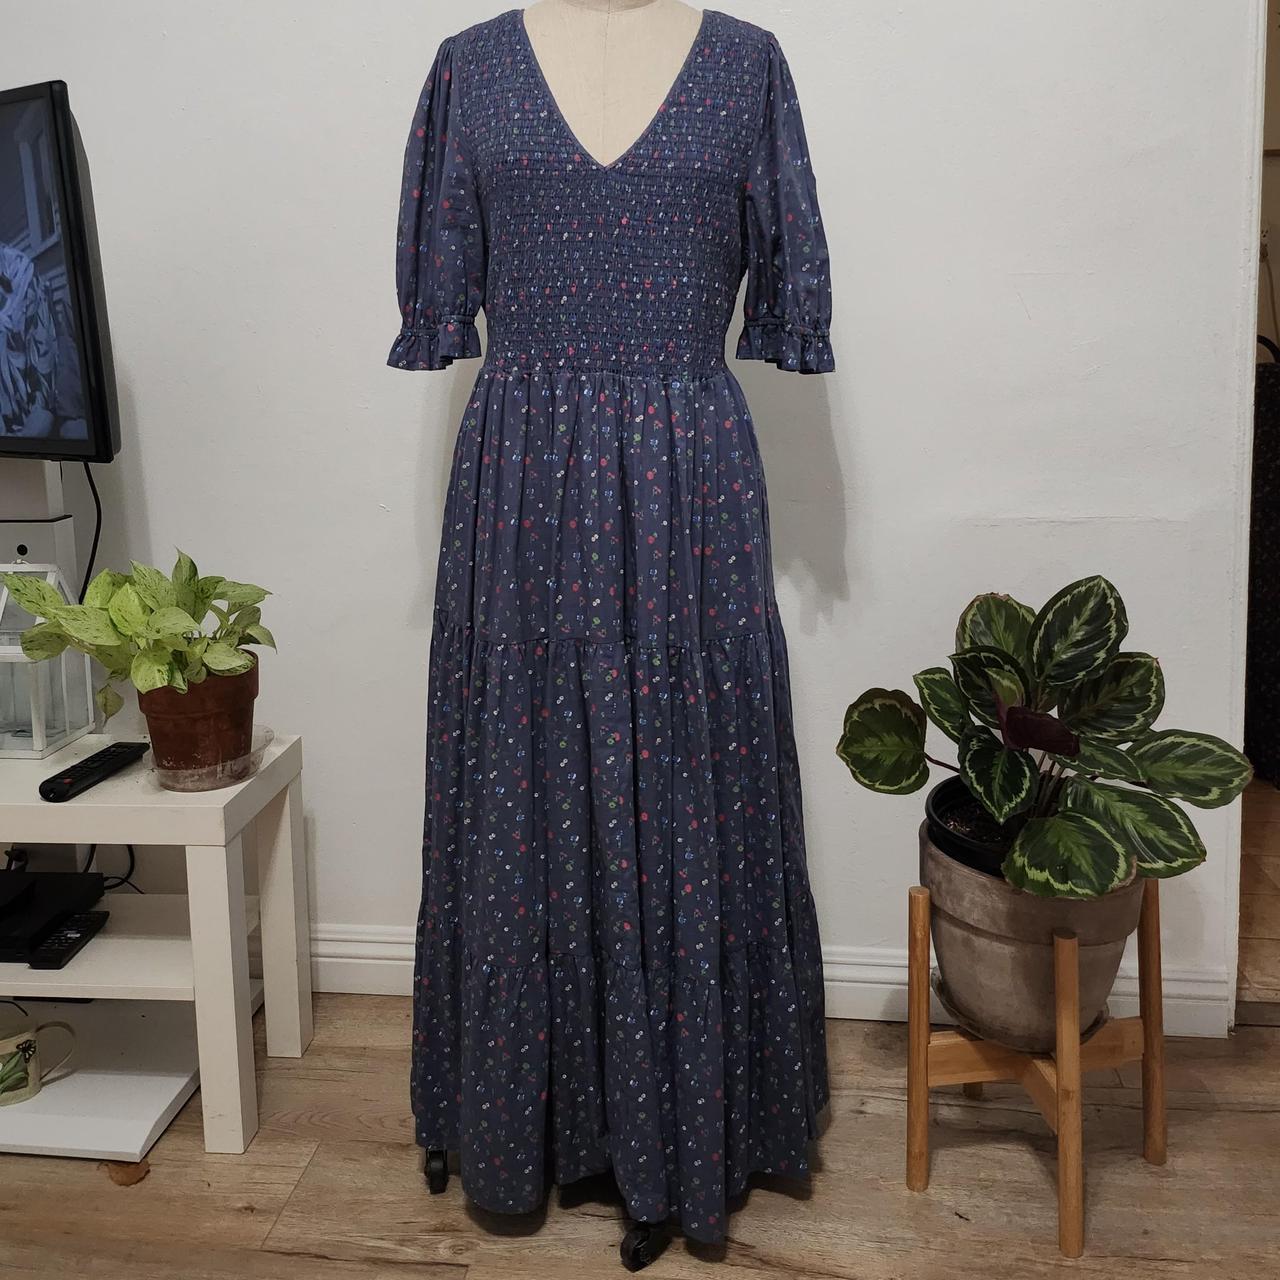 Product Image 2 - CHRISTY DAWN EXTENDED BROOKLYN DRESS

Perfect